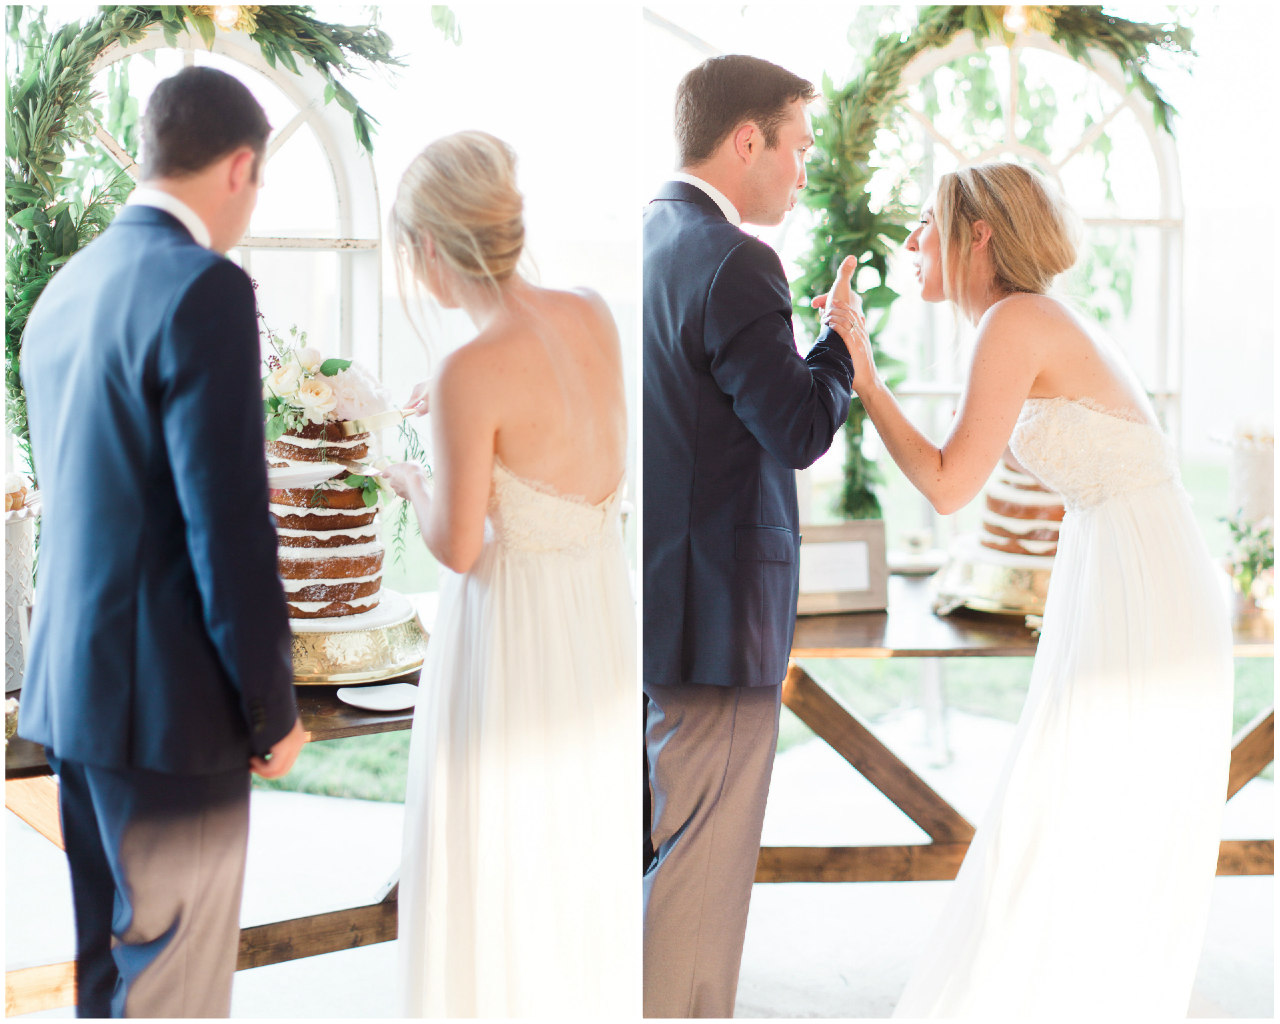 Cake Cutting | The Day's Design | Ashley Slater Photography